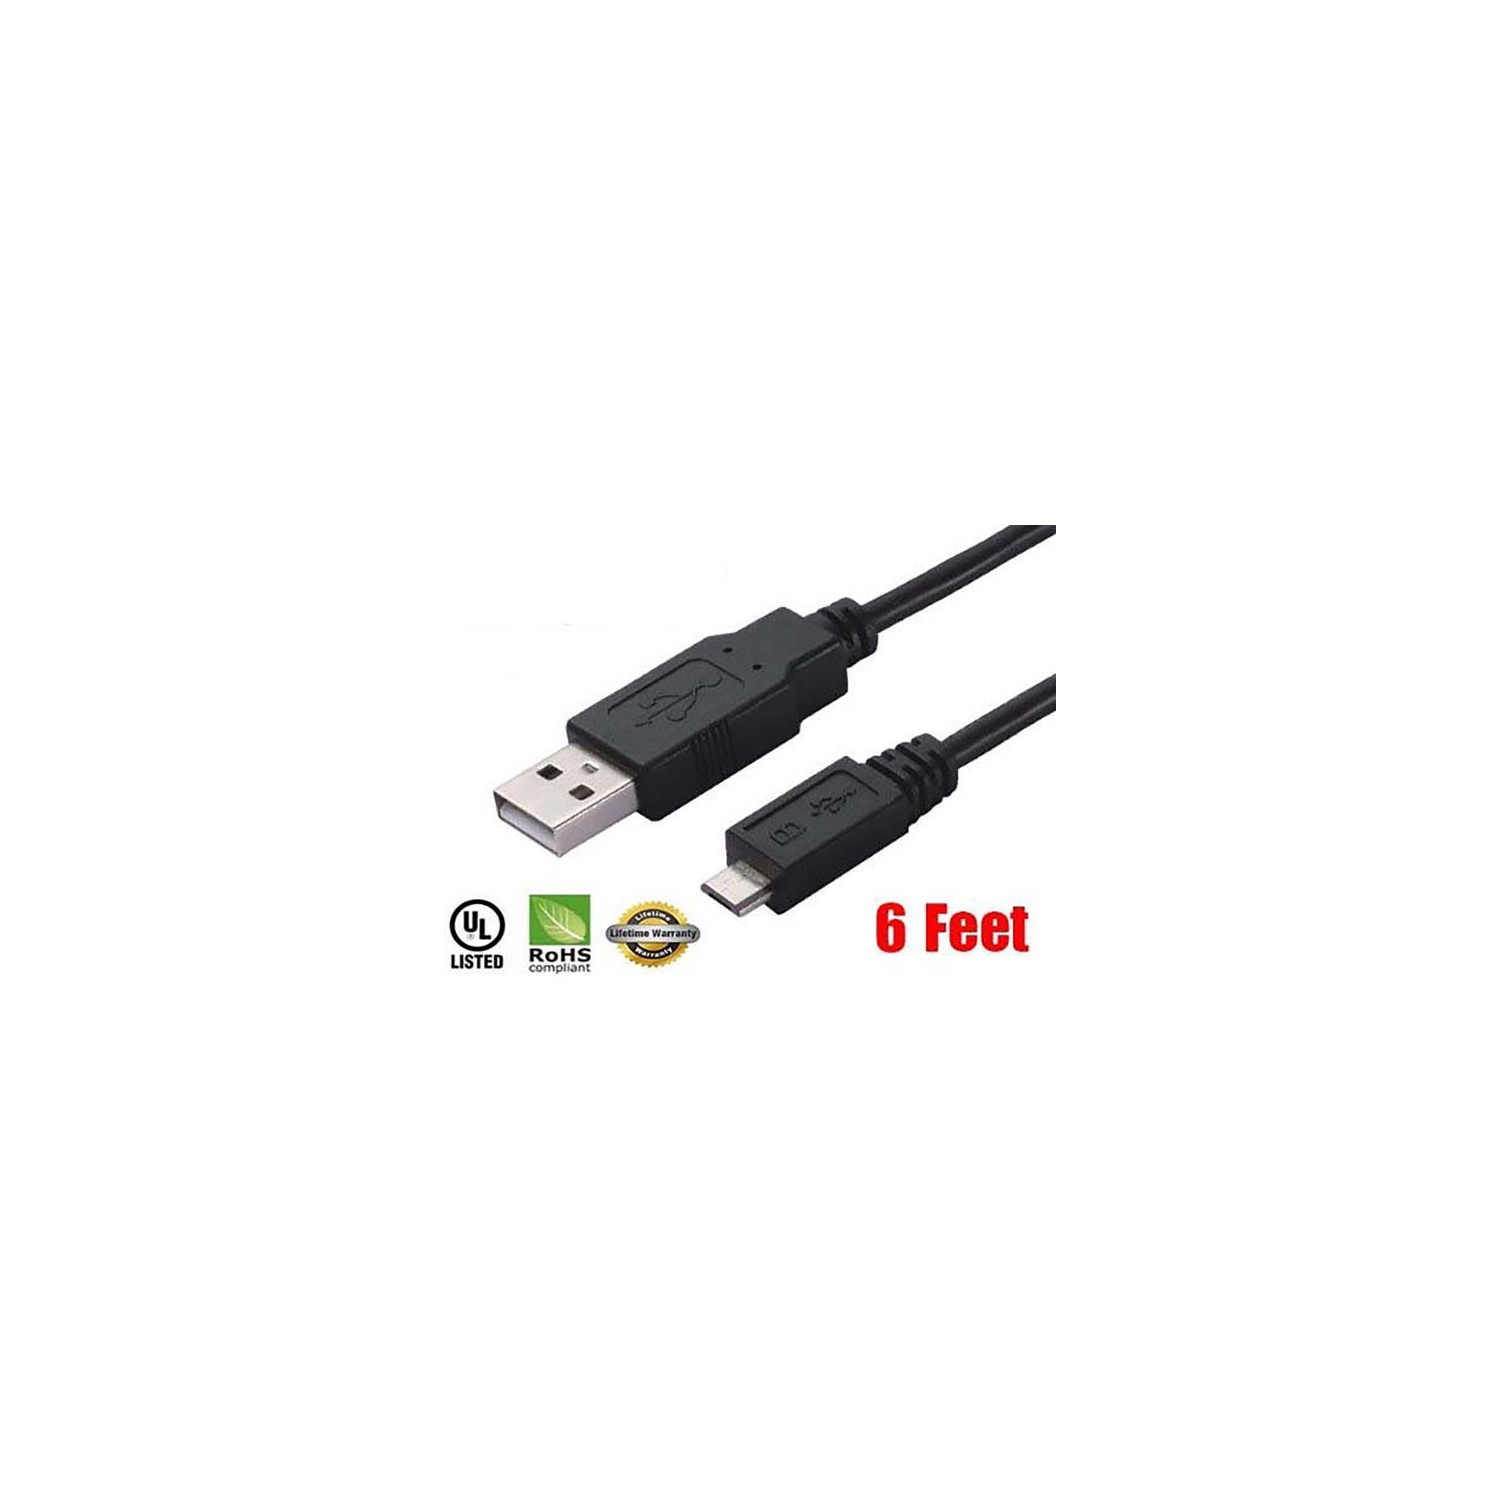 iMBAPrice 6 Feet USB to Micro USB Cable for HTC One/S/V/X/X+, EVO 4G LTE, EVO Design 4G, INCREDIBLE 4G LTE, Droid DNA, D